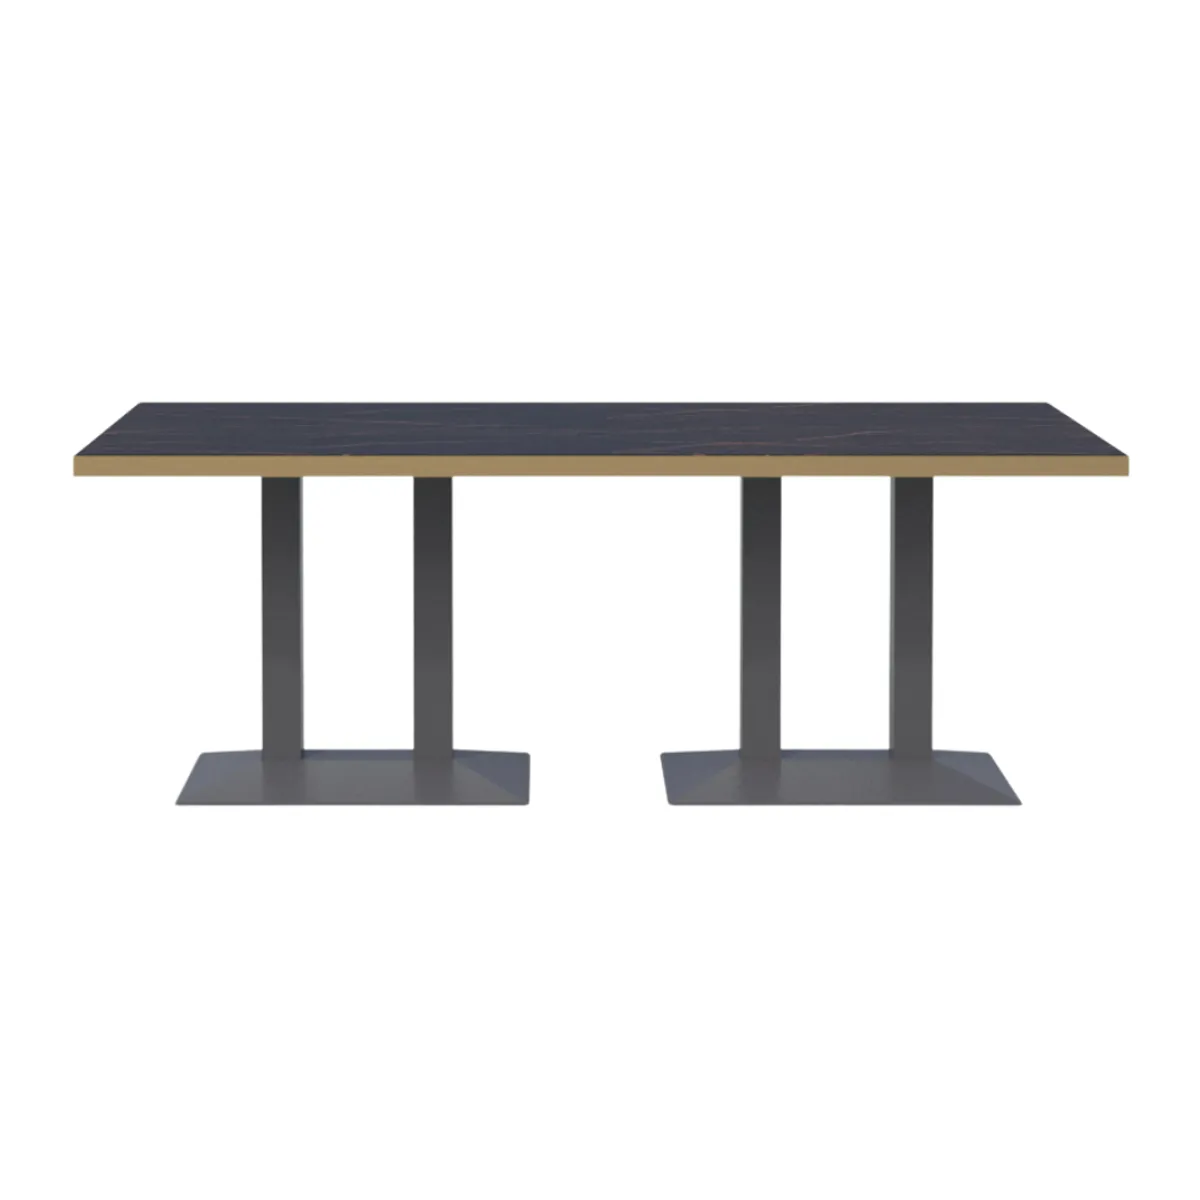 Gouqi large private dining table 2